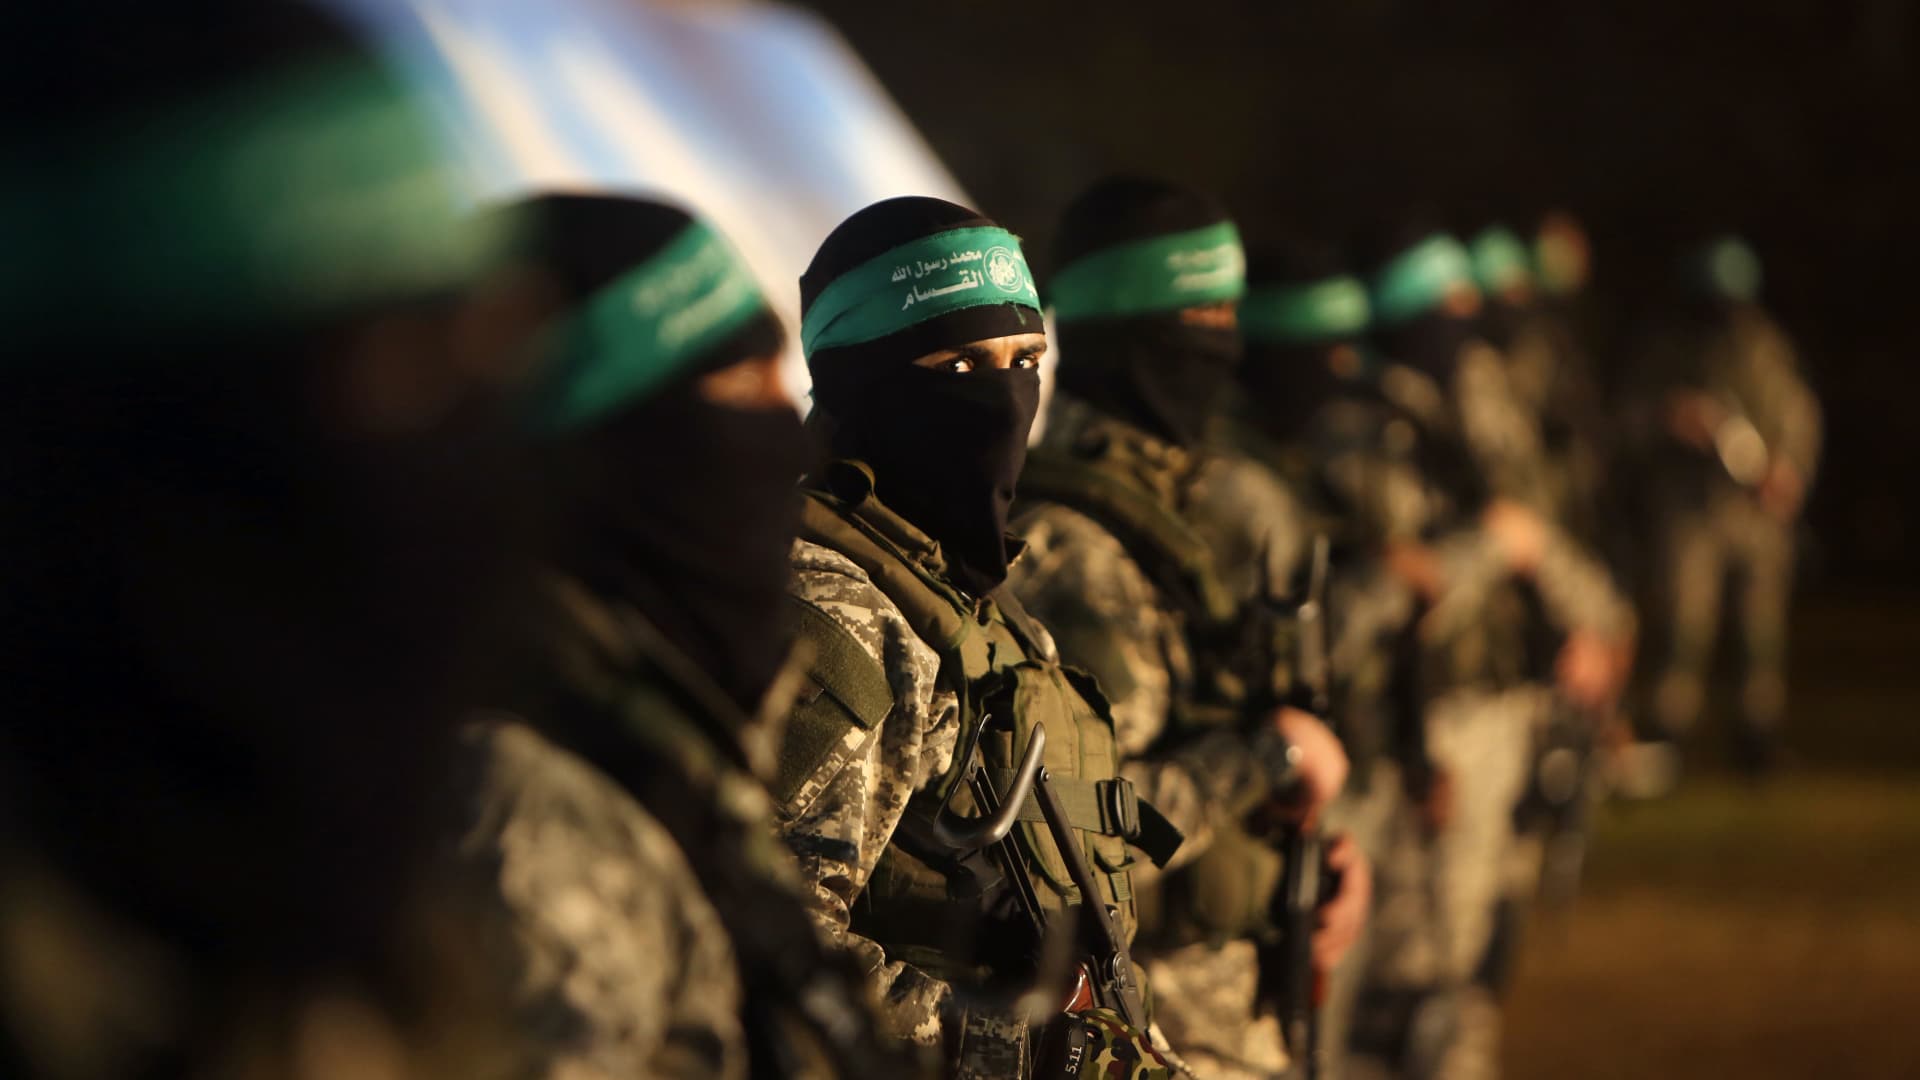 Where Hamas gets its money and why it's so hard to stop, even as the U.S. steps up efforts